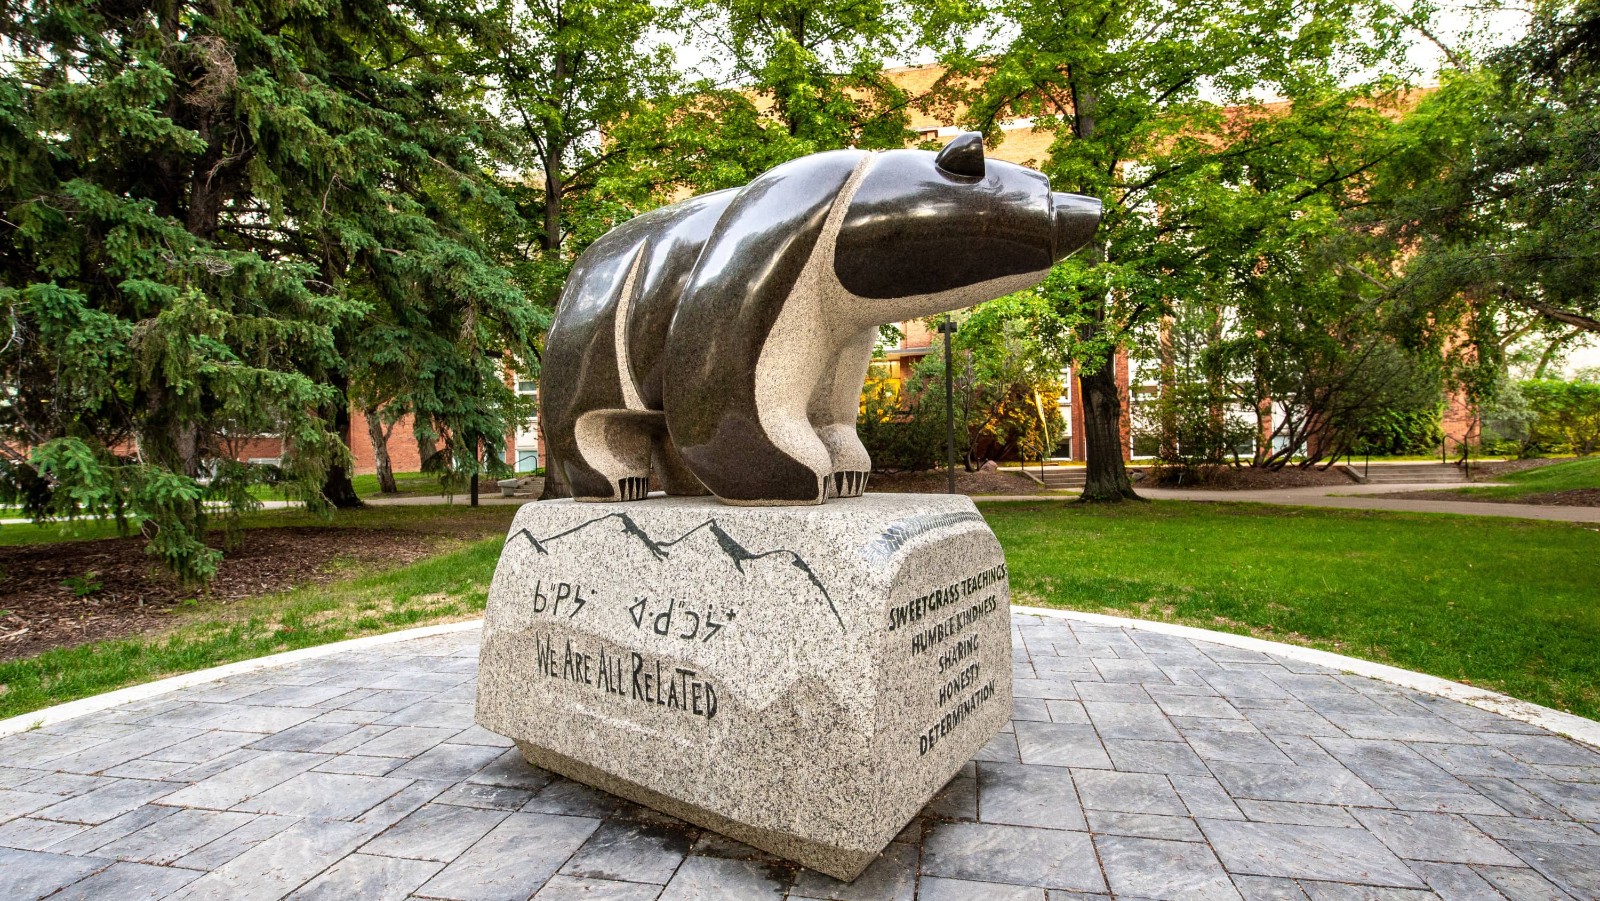 “The Sweetgrass Bear,” a granite sculpture by Cree artist Stewart Steinhauer, was installed on the U of A's North Campus quad in 2016 as a marker of Treaty 6 territory and a symbol of the university's efforts toward respectful, meaningful reconciliation with Indigenous Peoples. (Photo: Richard Siemens)